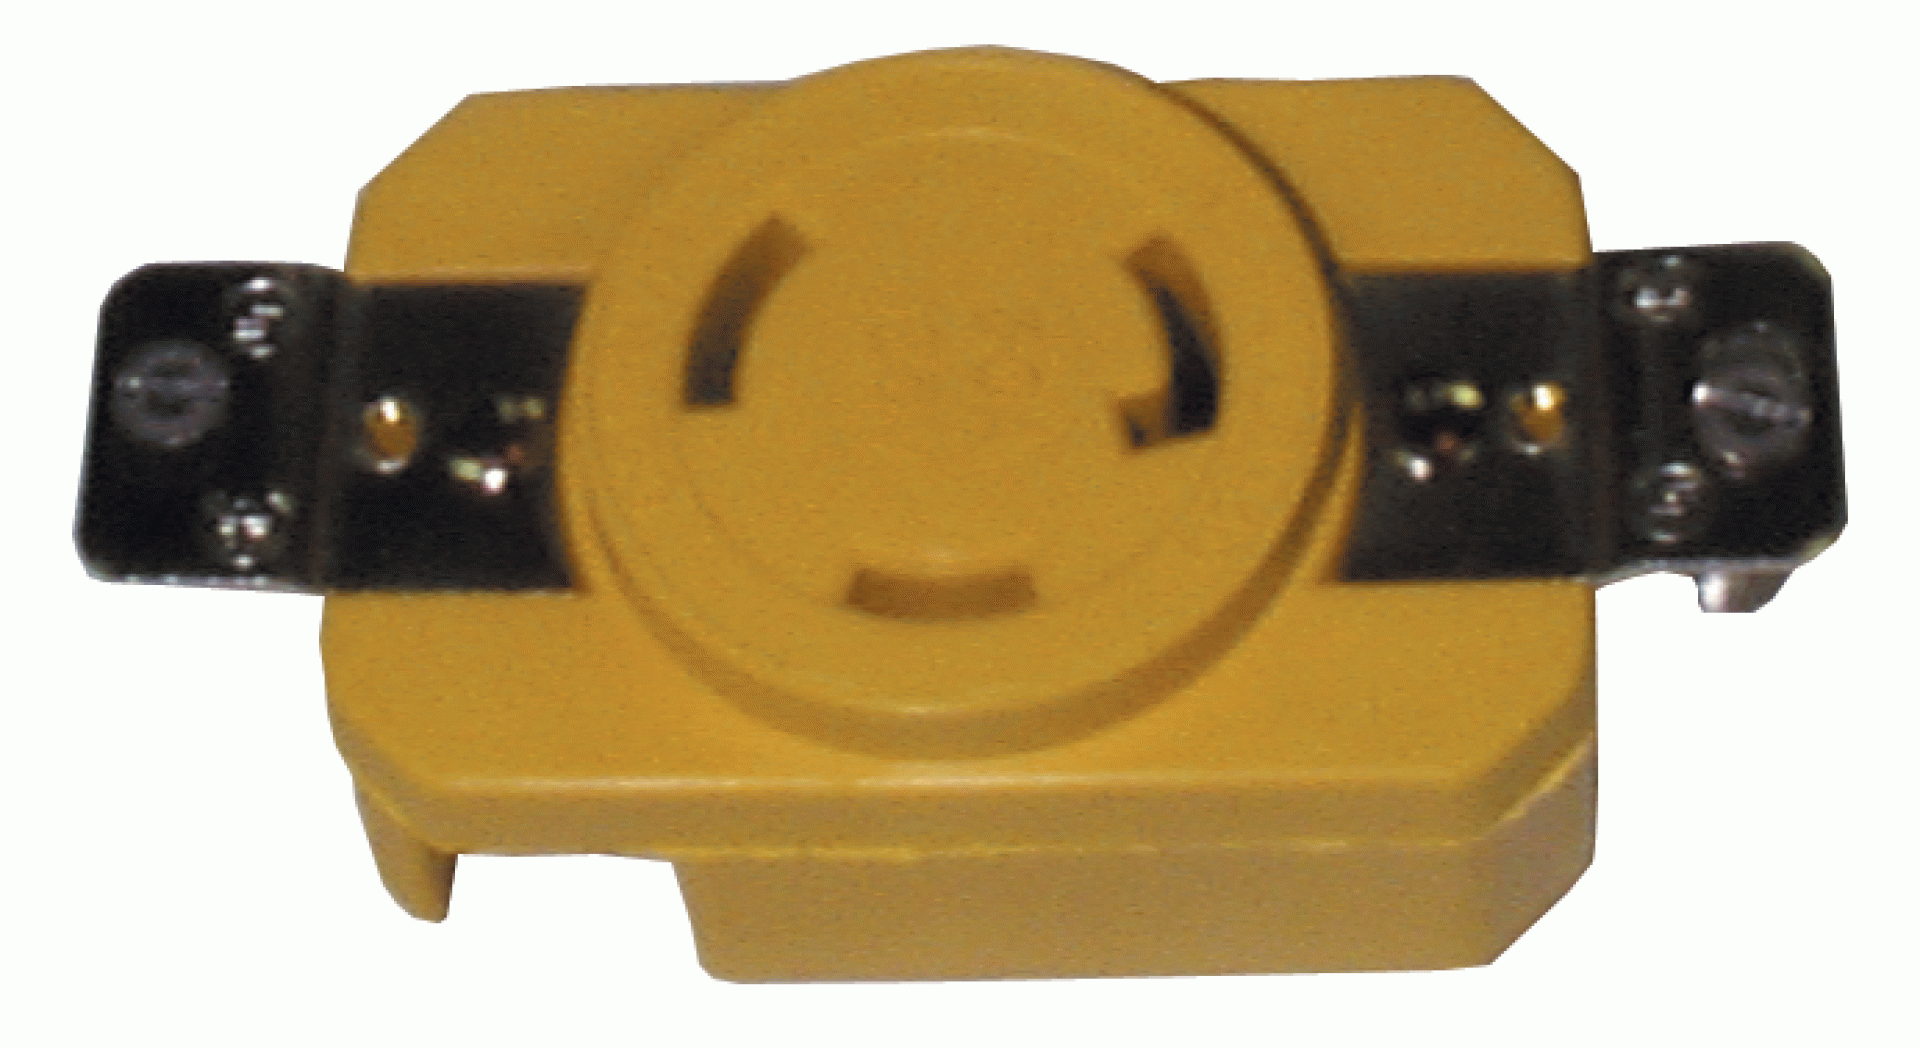 MARINCO | 305CRR | RECEPTACLE - 30A-125V YELLOW - 305 CRR